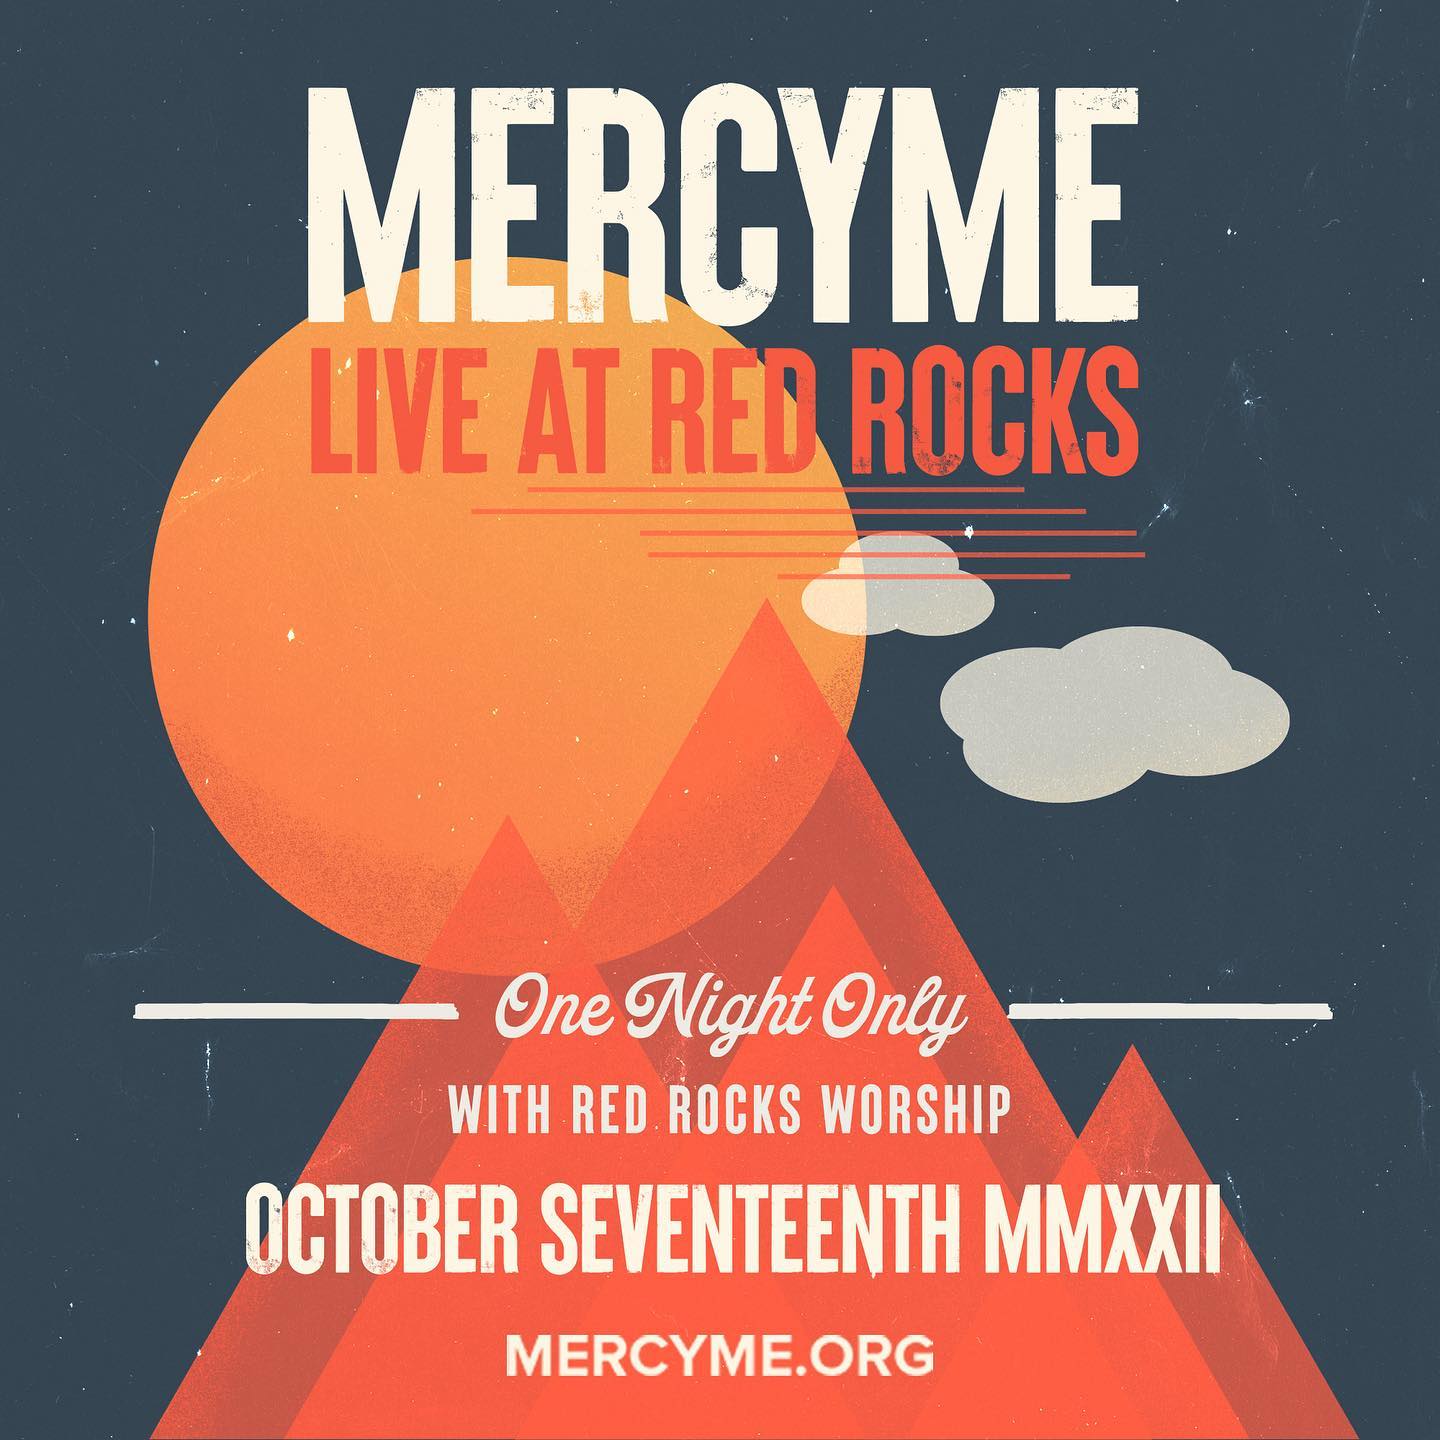 Just added: @redrocksworship ‼️We’re excited for an incredible night at the iconic Red Rocks Amphitheater. Book that travel. You’re not going to want to miss this. 🔥🔥